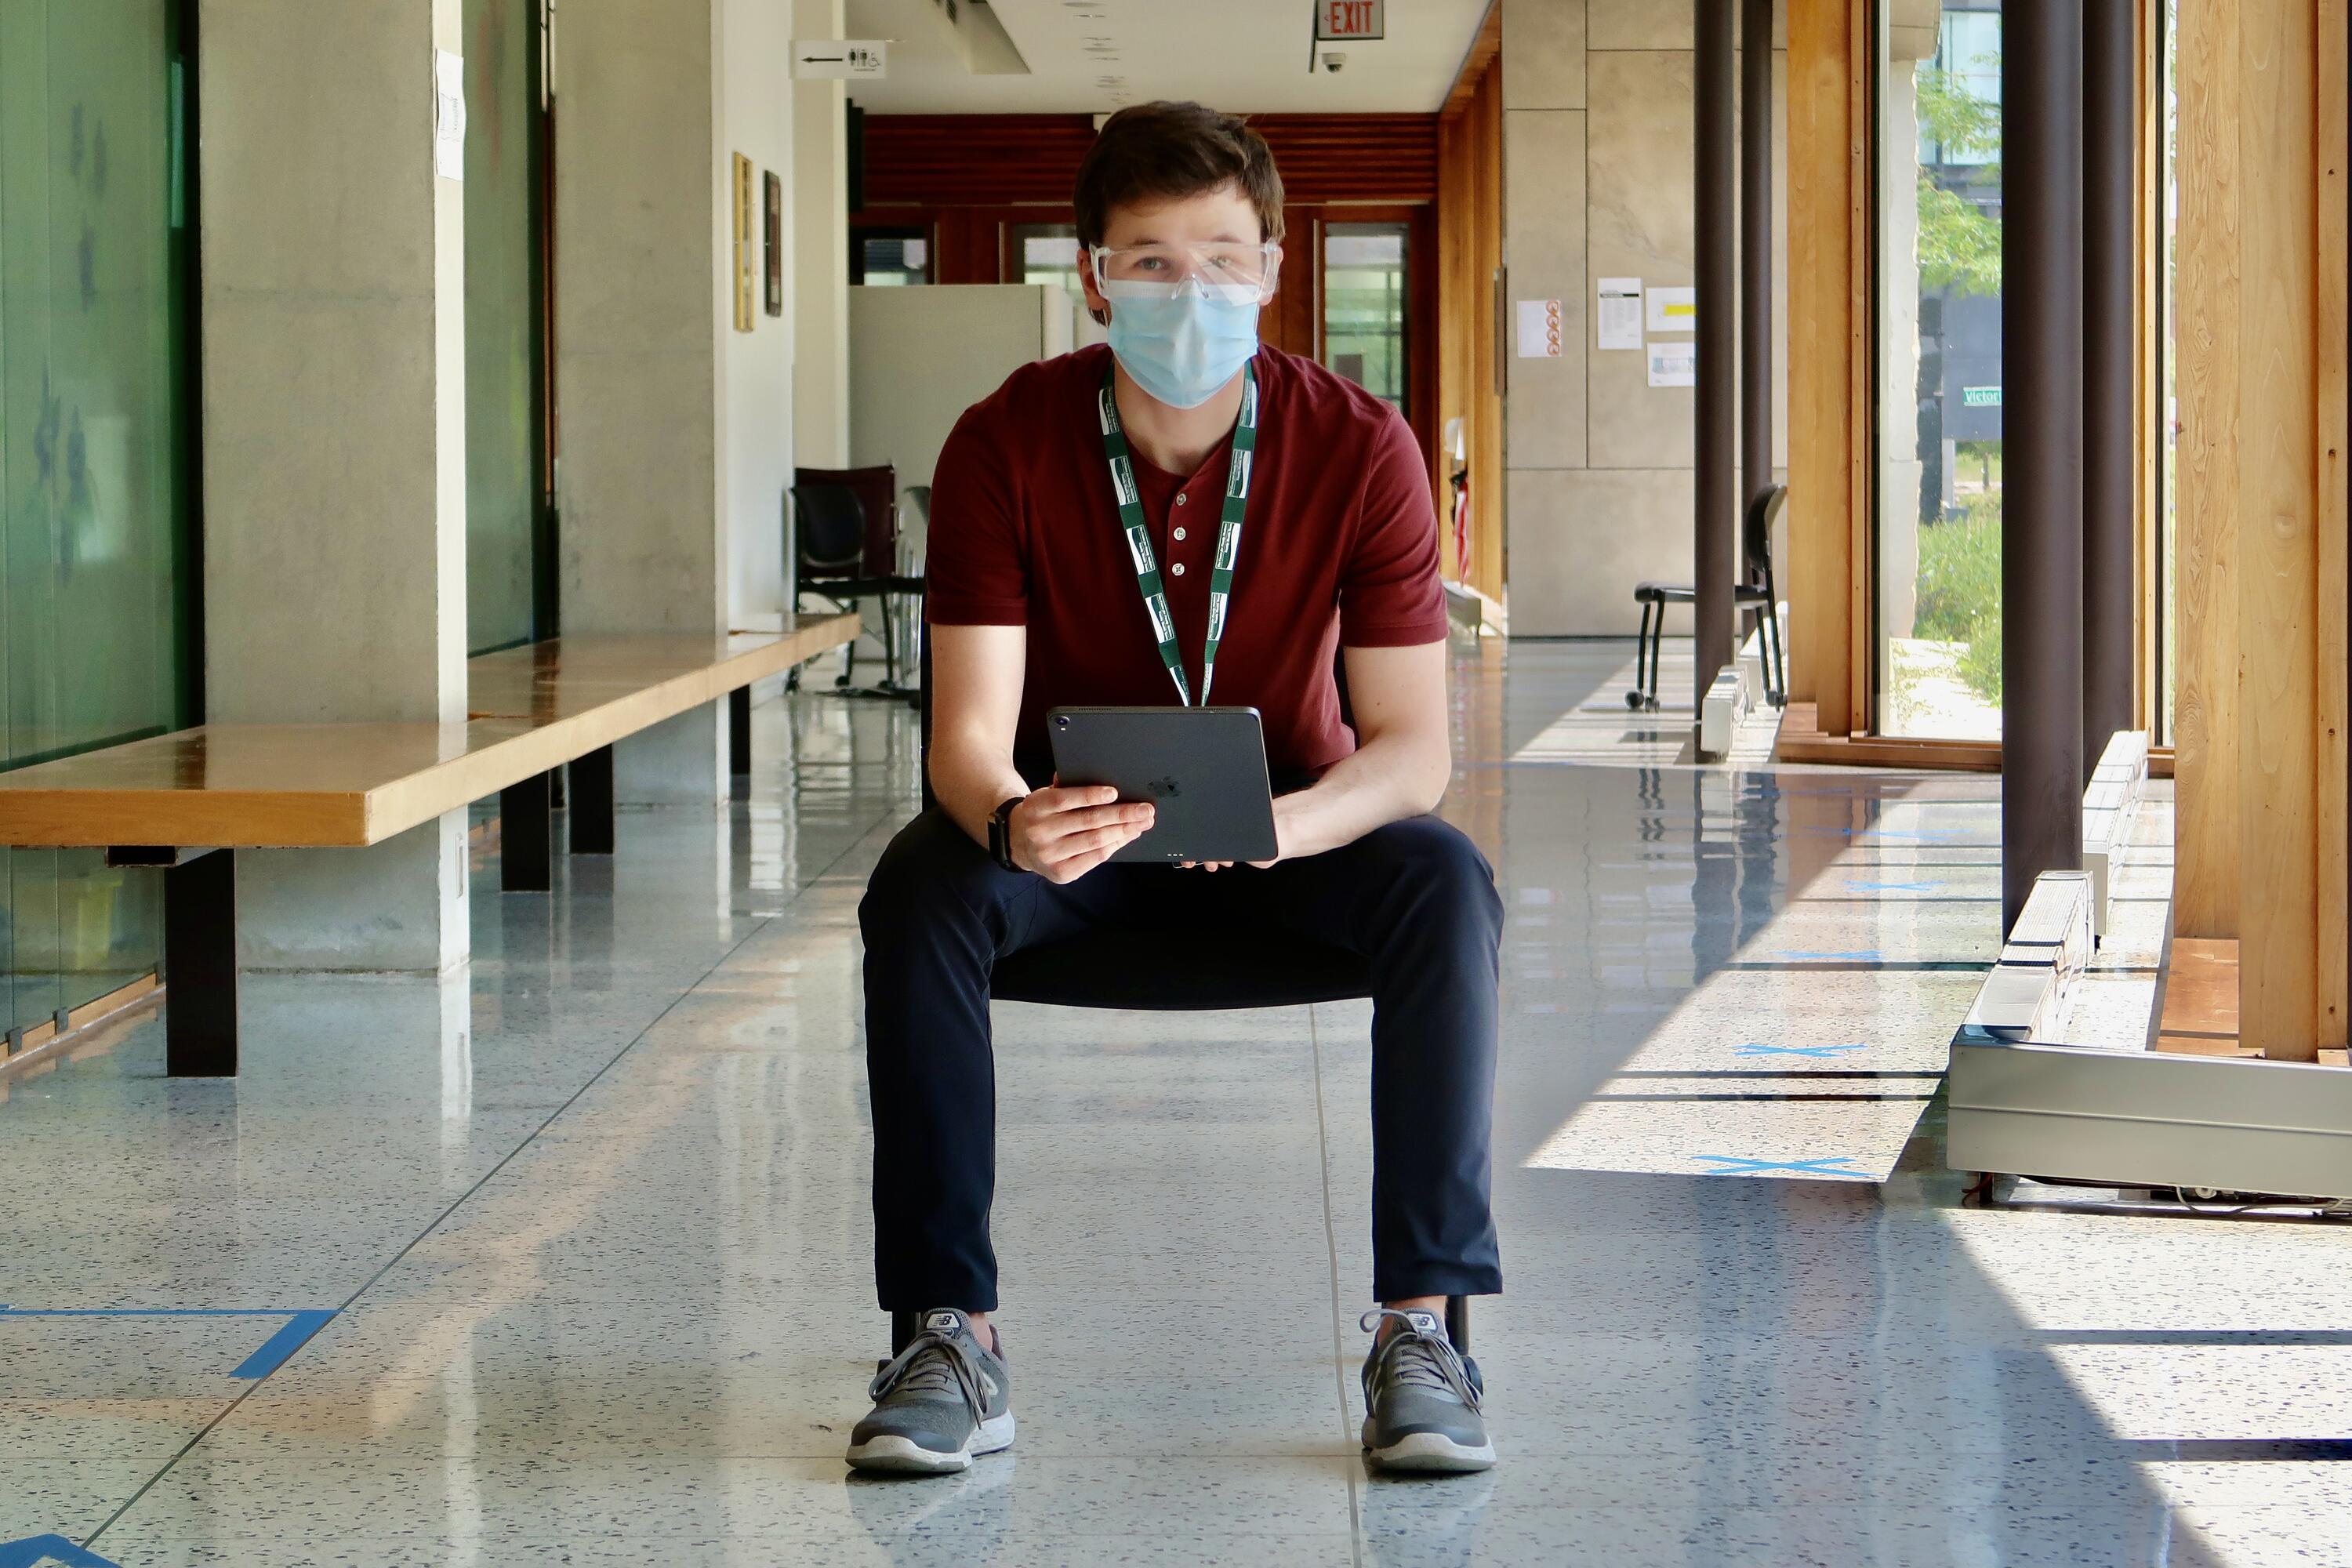 Ryan wearing PPE in a hallway with a tablet